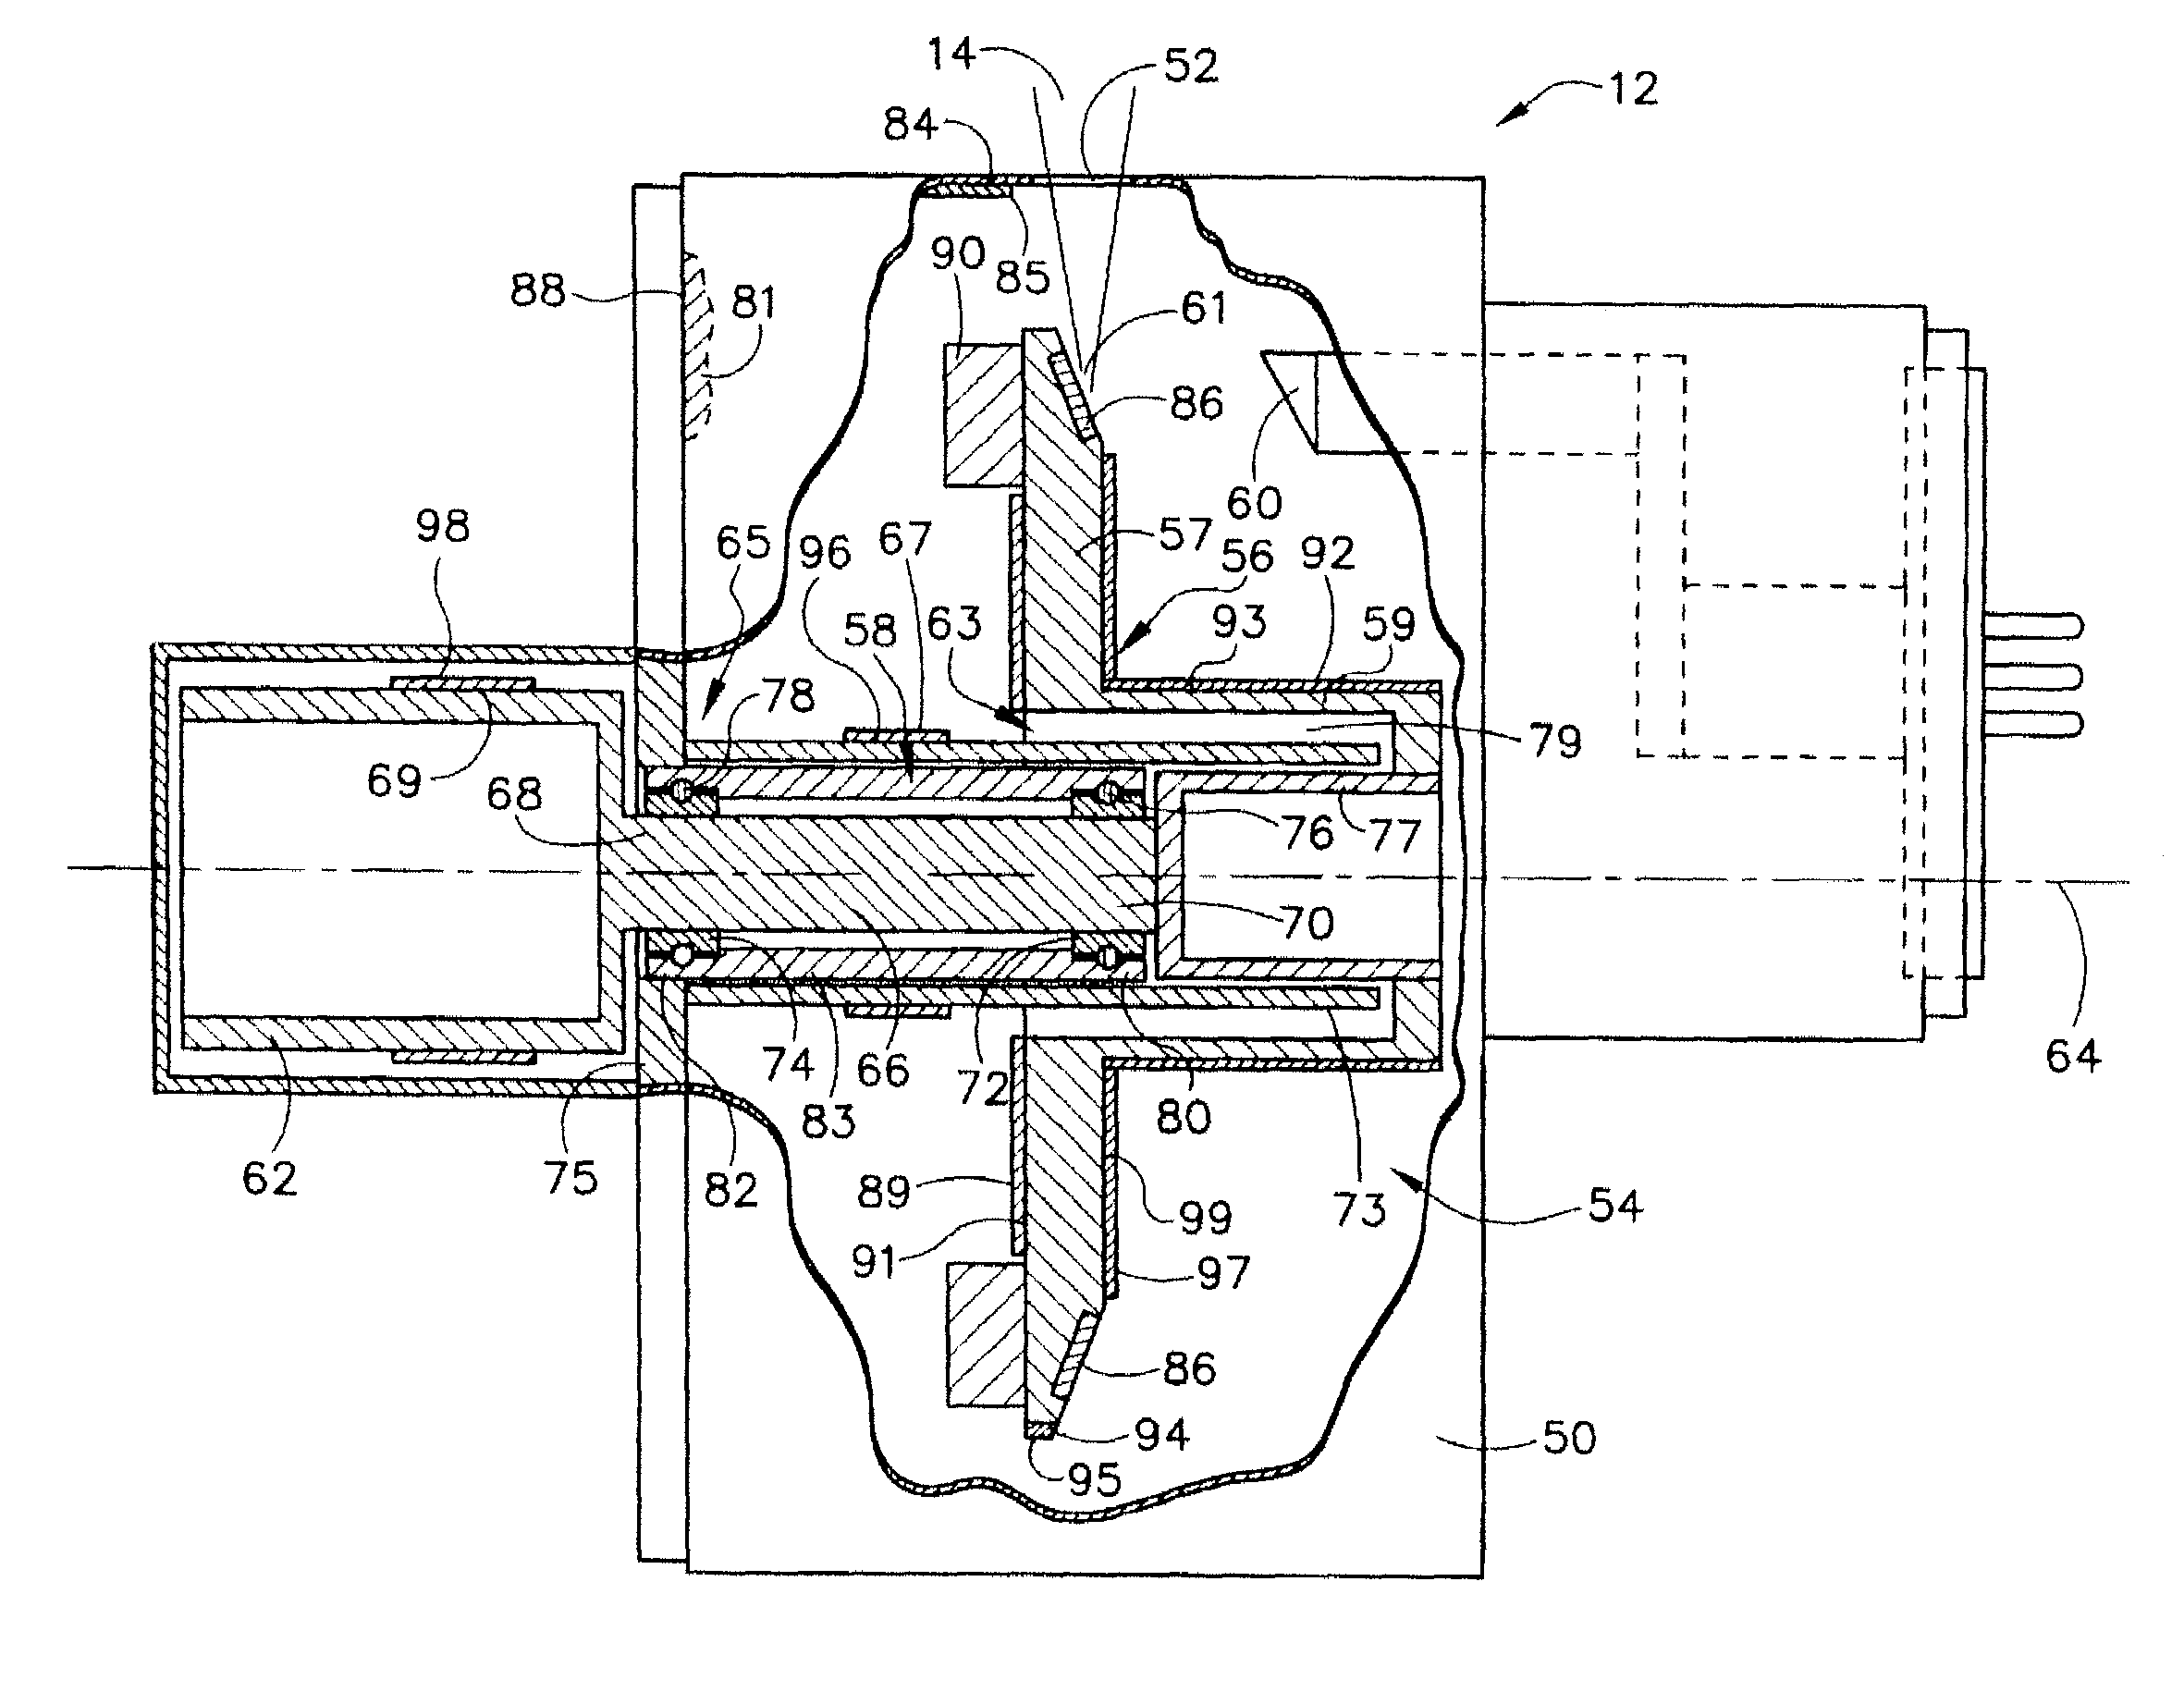 Apparatus for increasing radiative heat transfer in an x-ray tube and method of making same